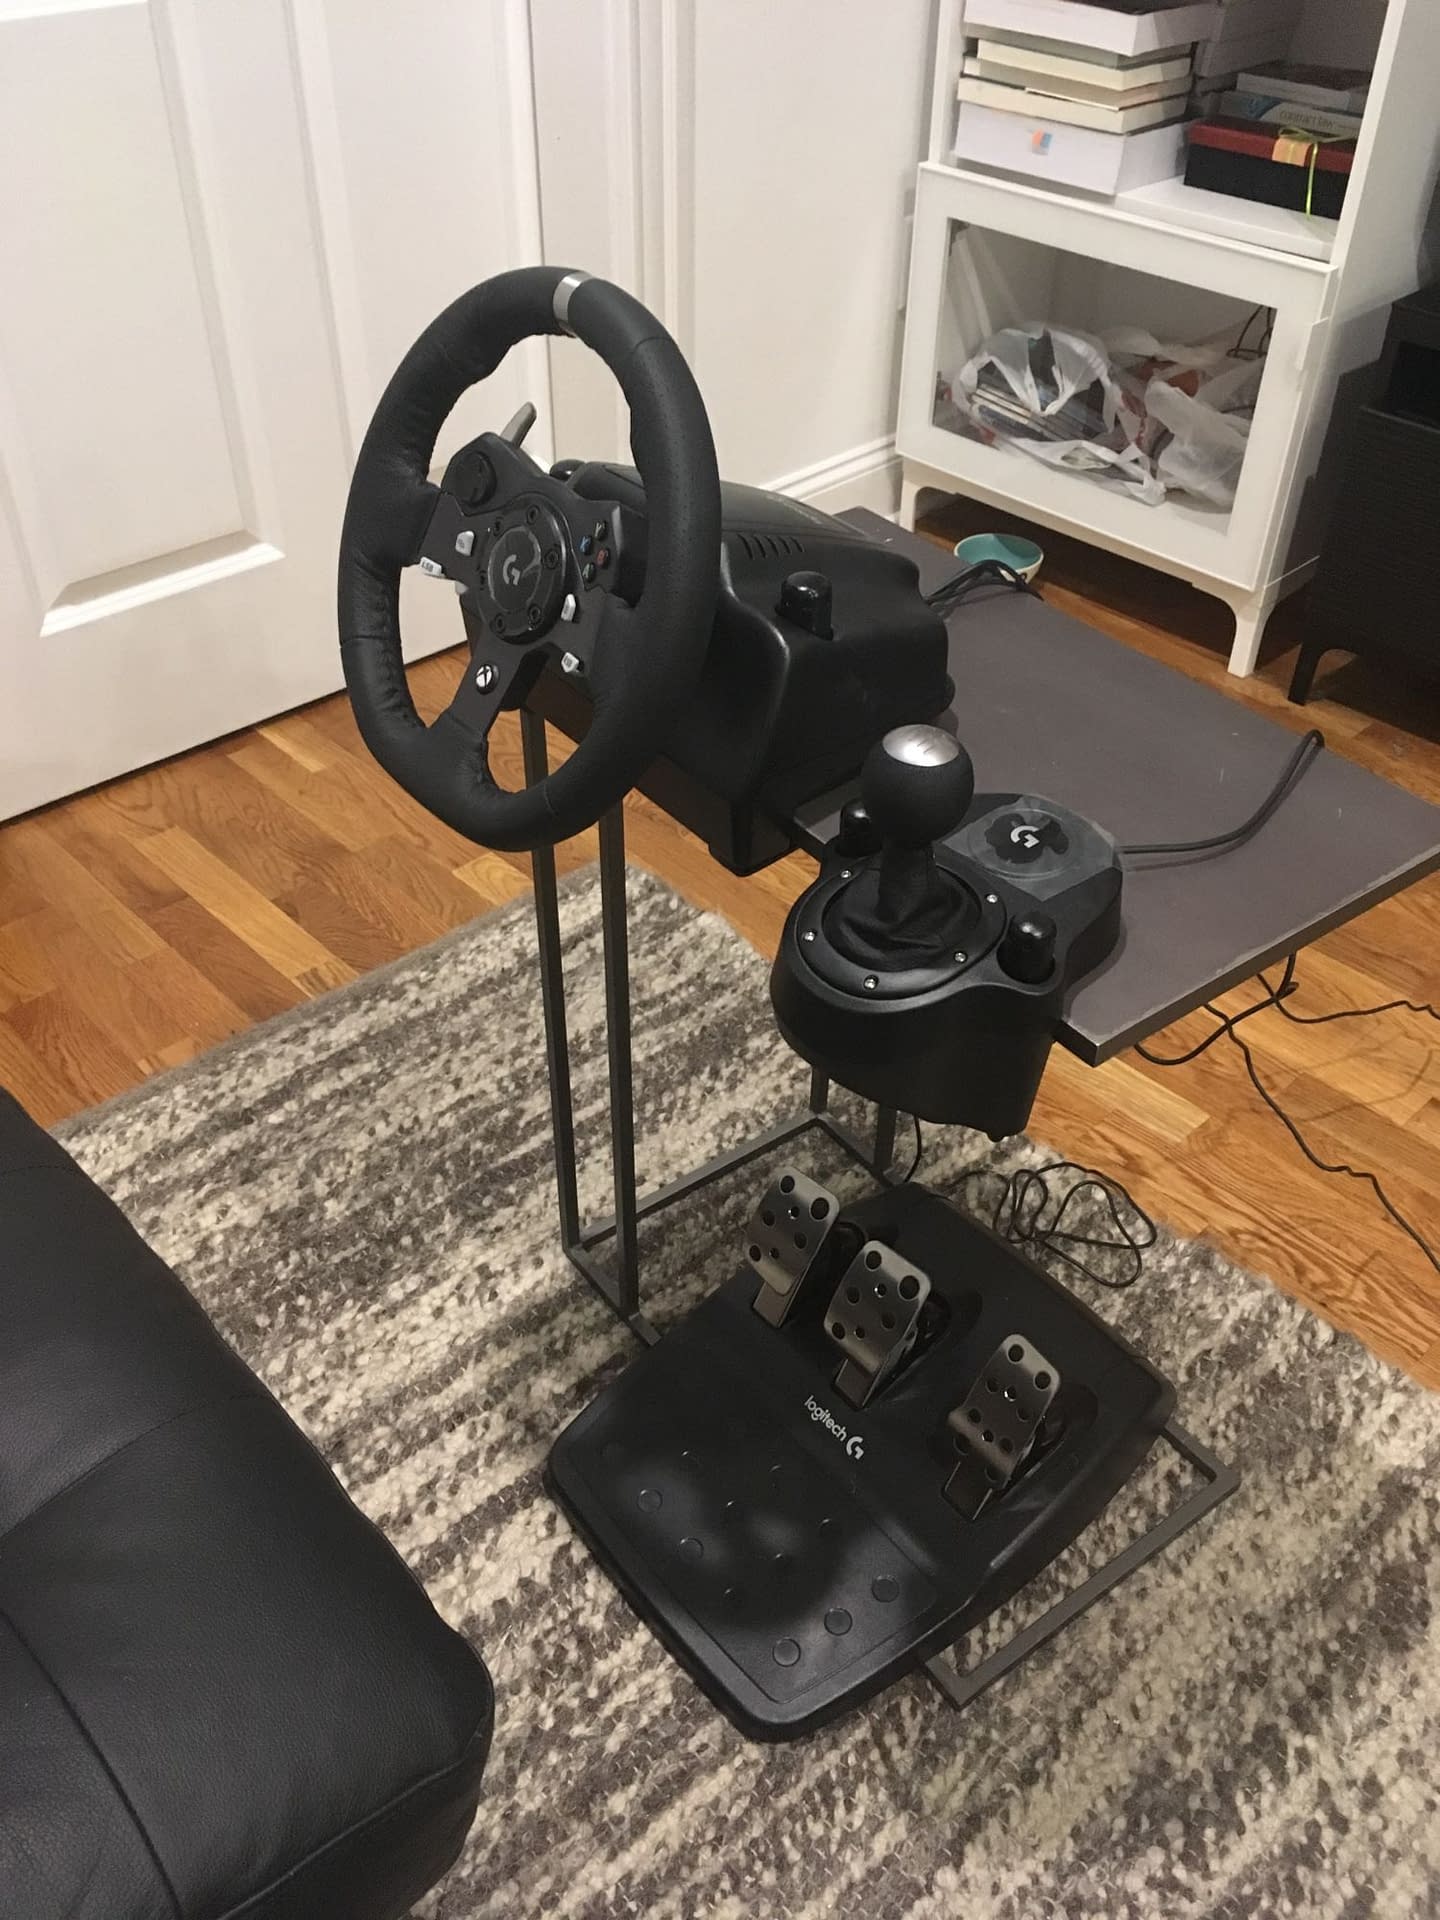 Logitech's Driving Force Wheel, and Shifter are Good but not Real Enough